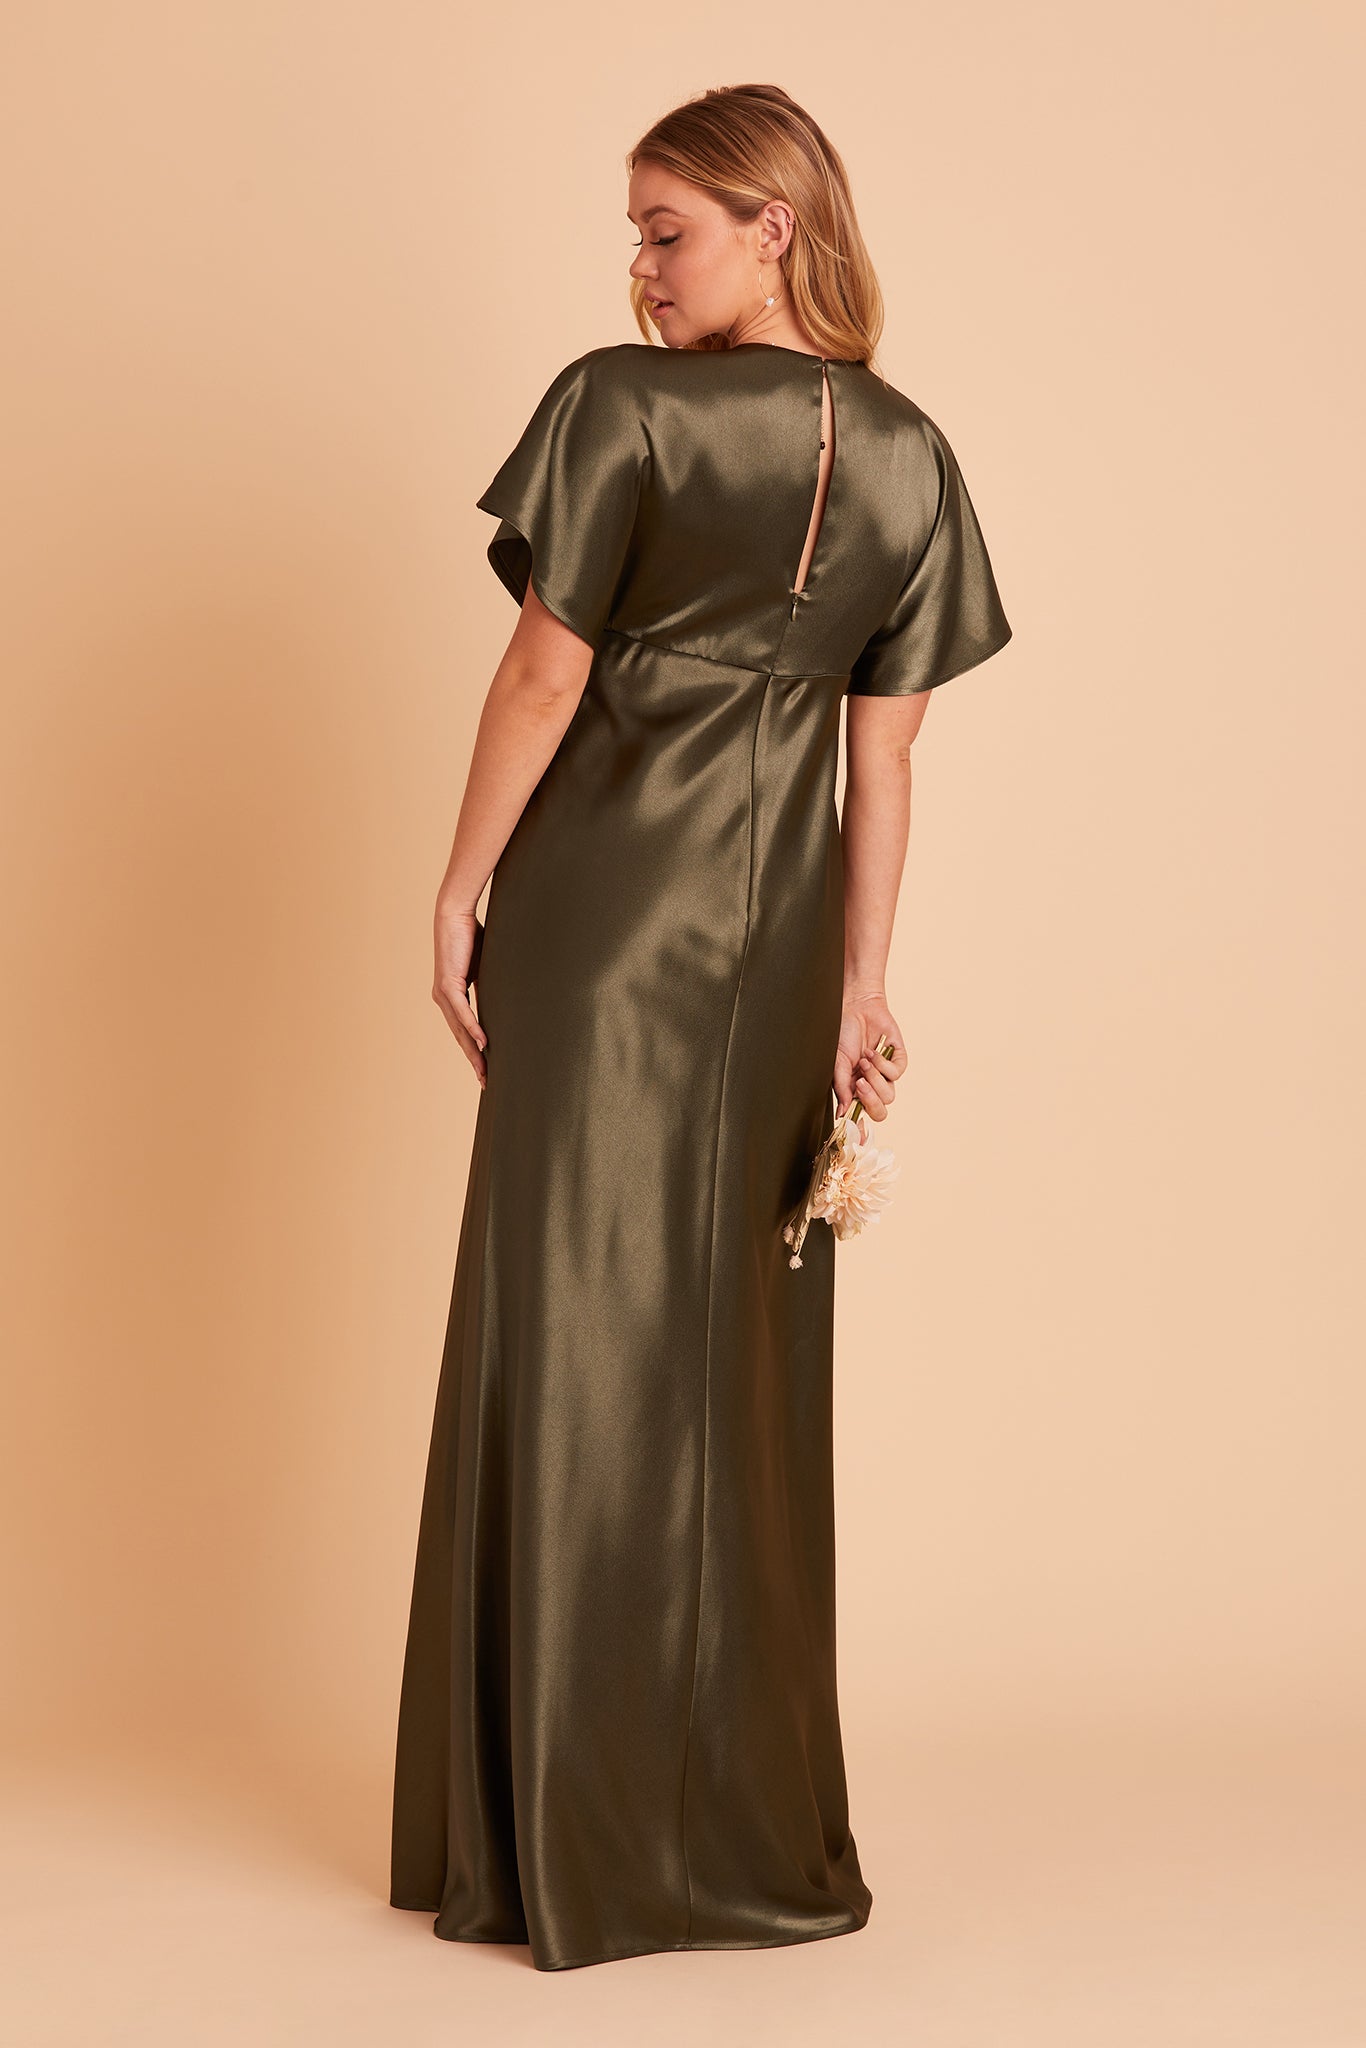 Jesse bridesmaid dress with slit in olive satin by Birdy Grey, back view